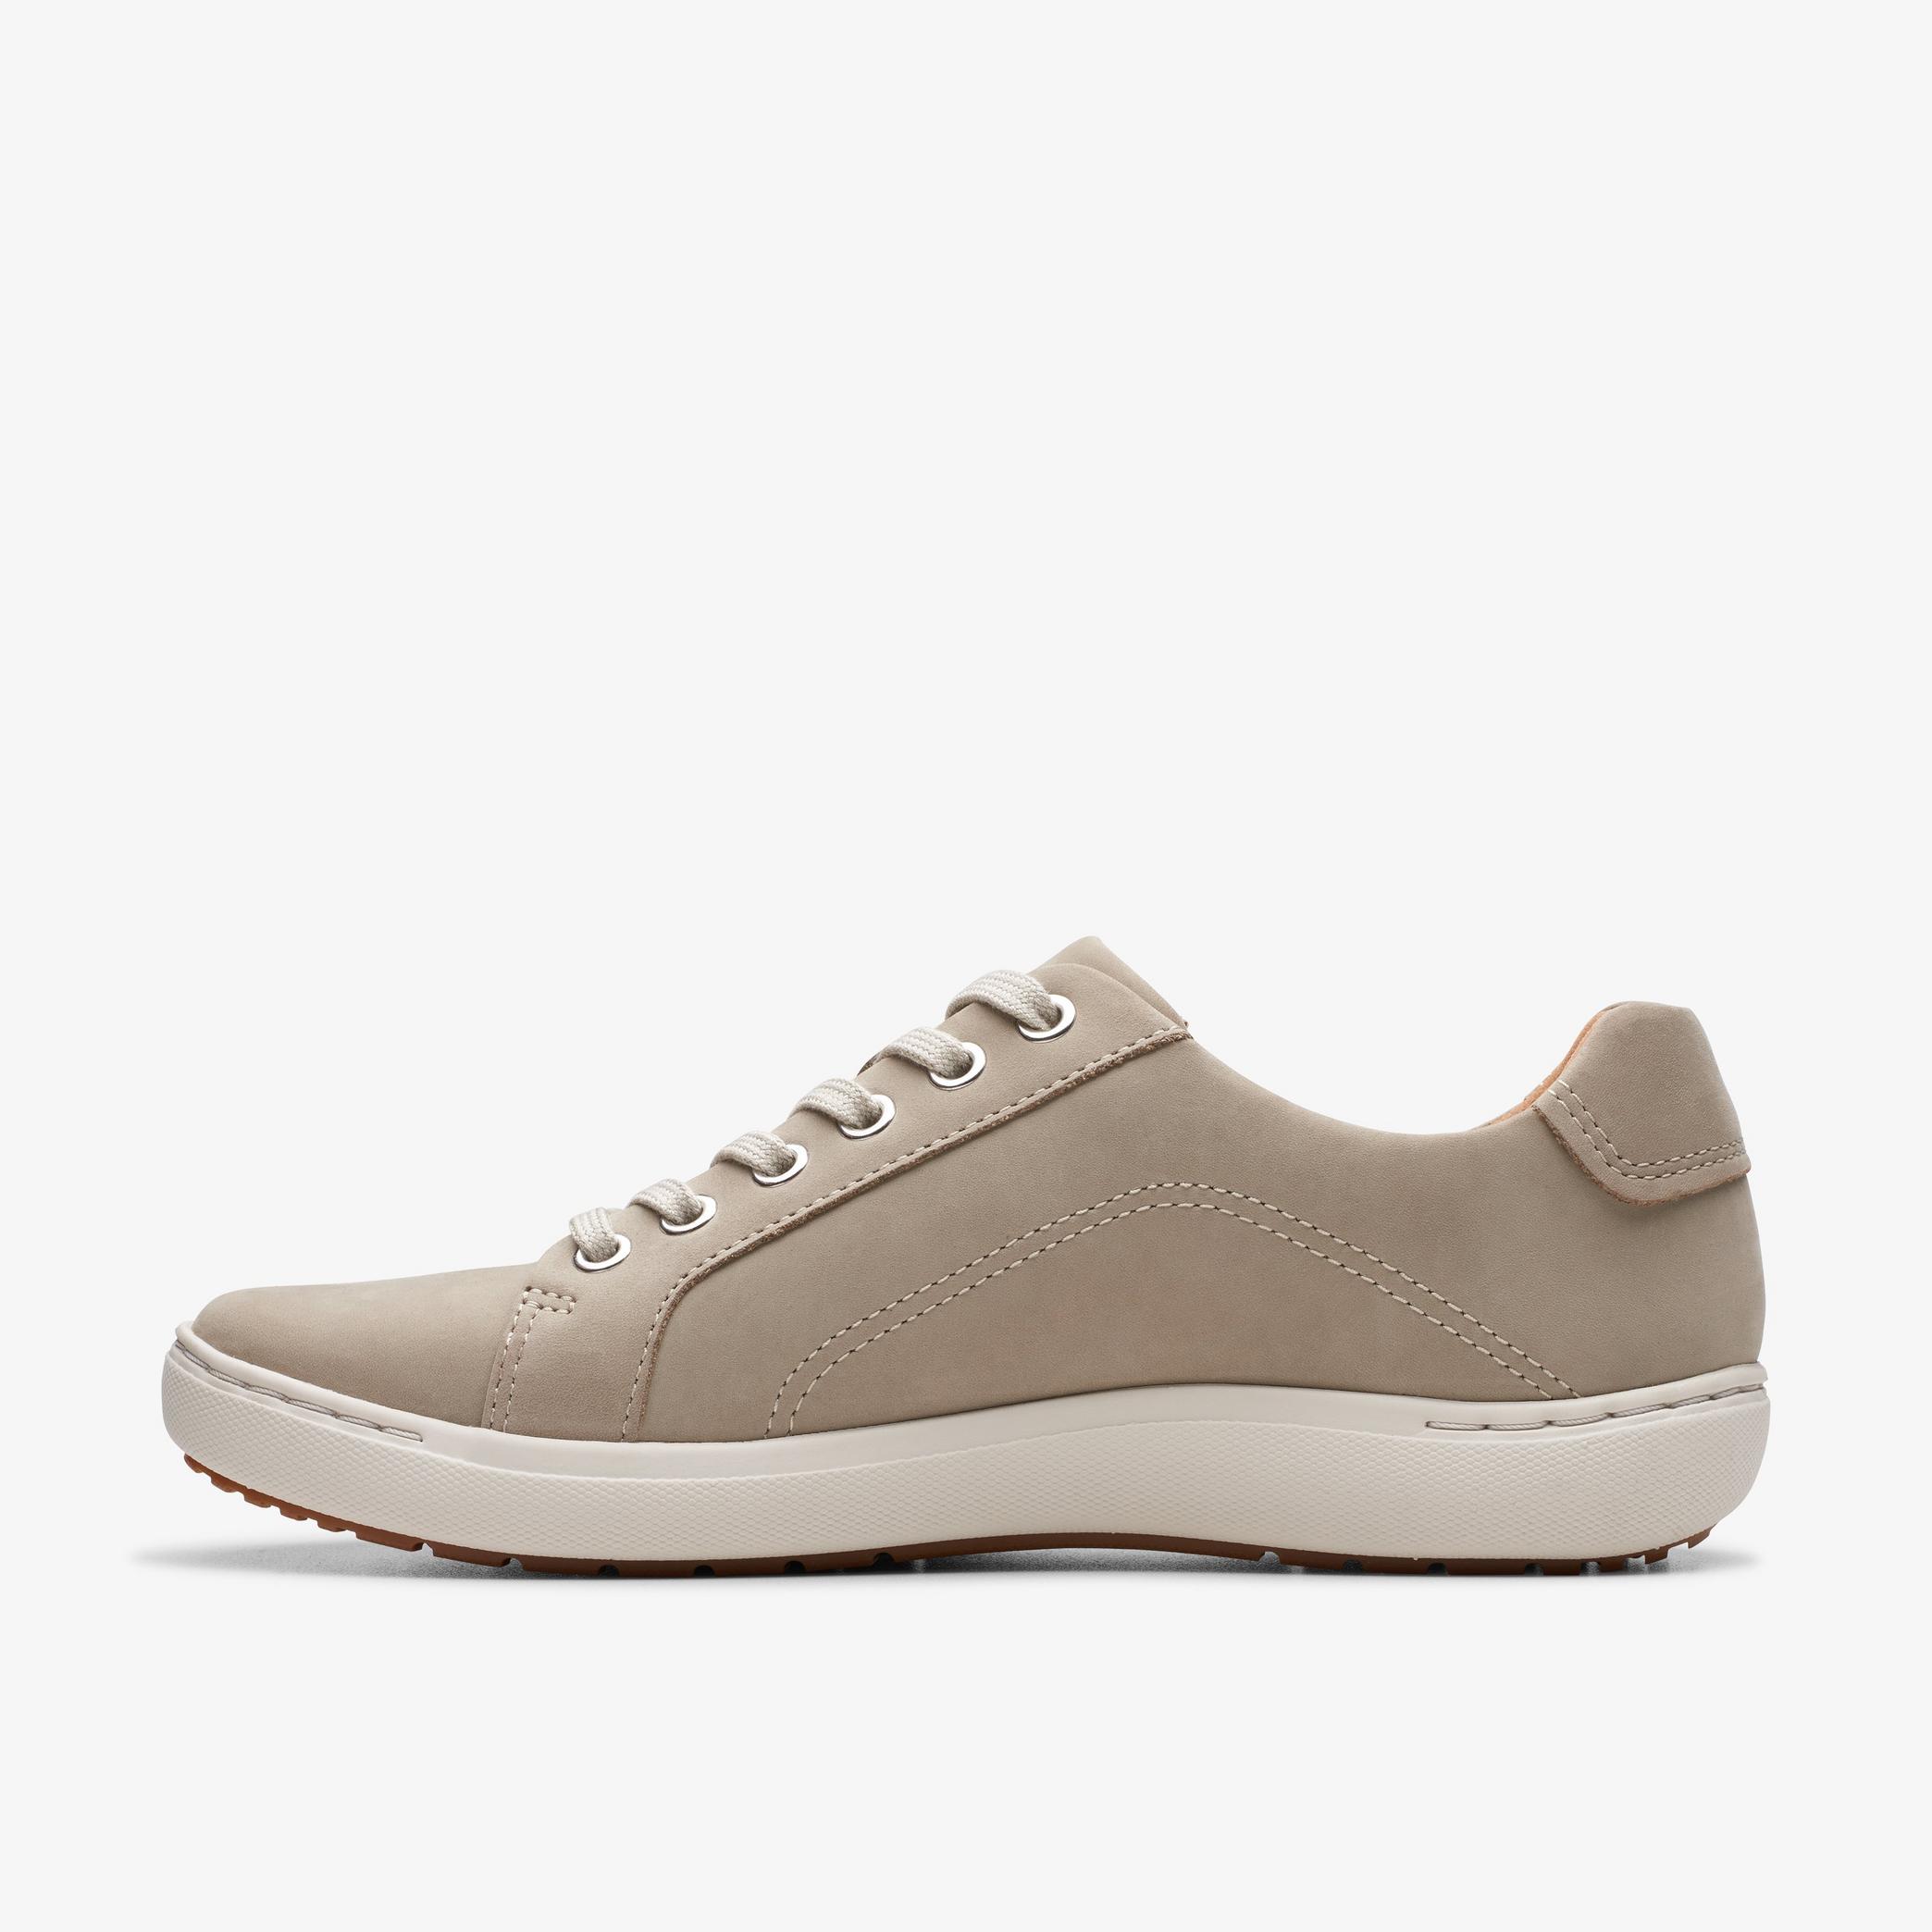 Nalle Lace Stone Nubuck Sneakers, view 2 of 7